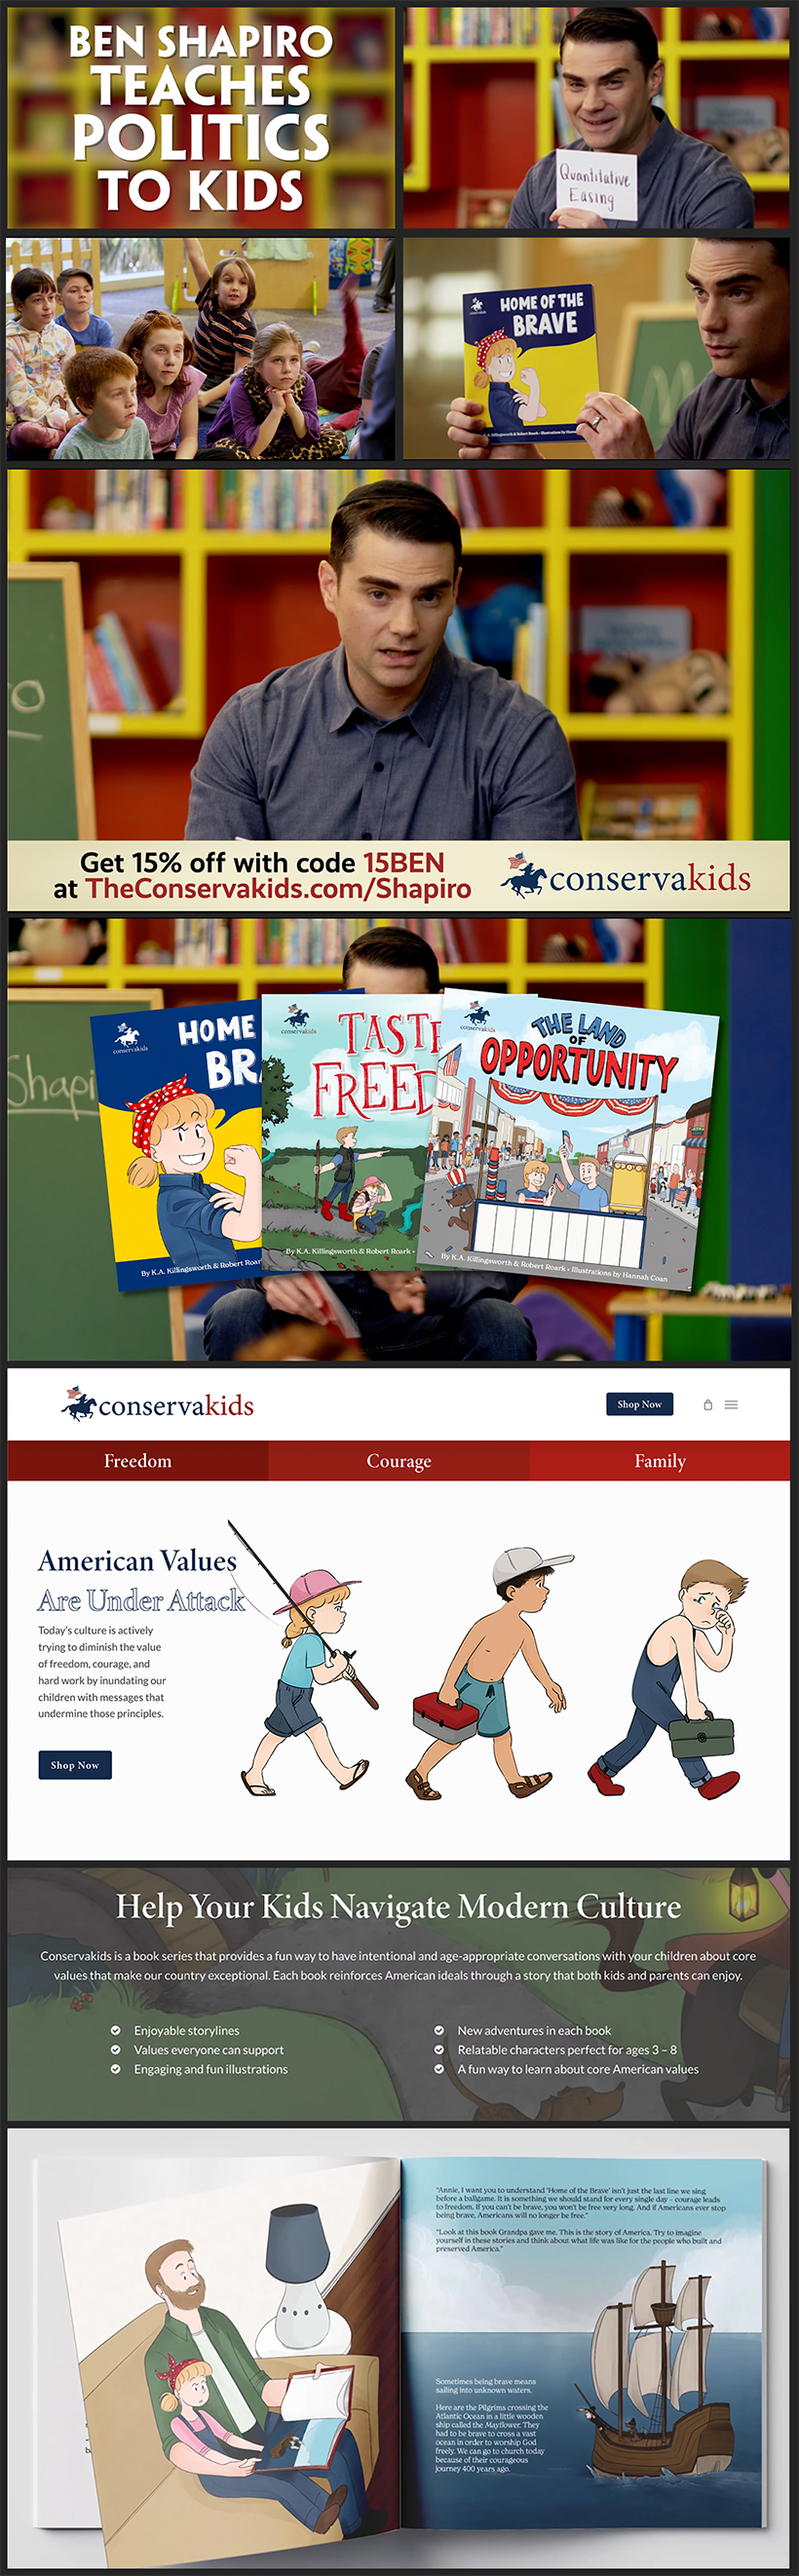 Stills from Ben Shapiro Explains Politics to Kids & theconservakids.com | A spread from Home of the Brave – the story itself is of a parent using a book to teach their kid their values.



